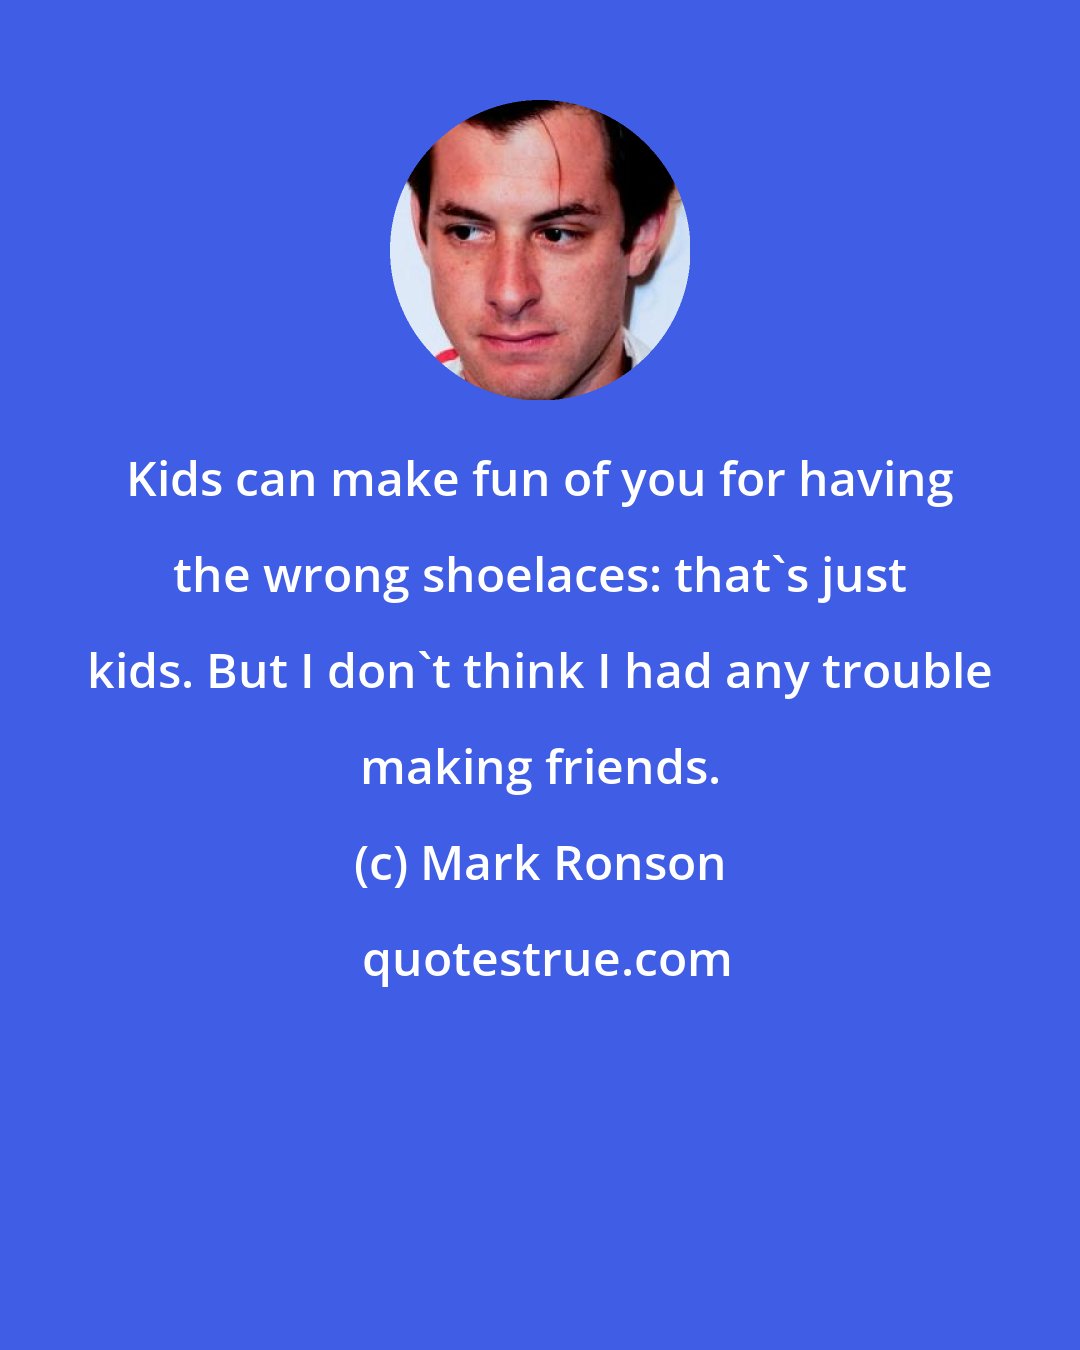 Mark Ronson: Kids can make fun of you for having the wrong shoelaces: that's just kids. But I don't think I had any trouble making friends.